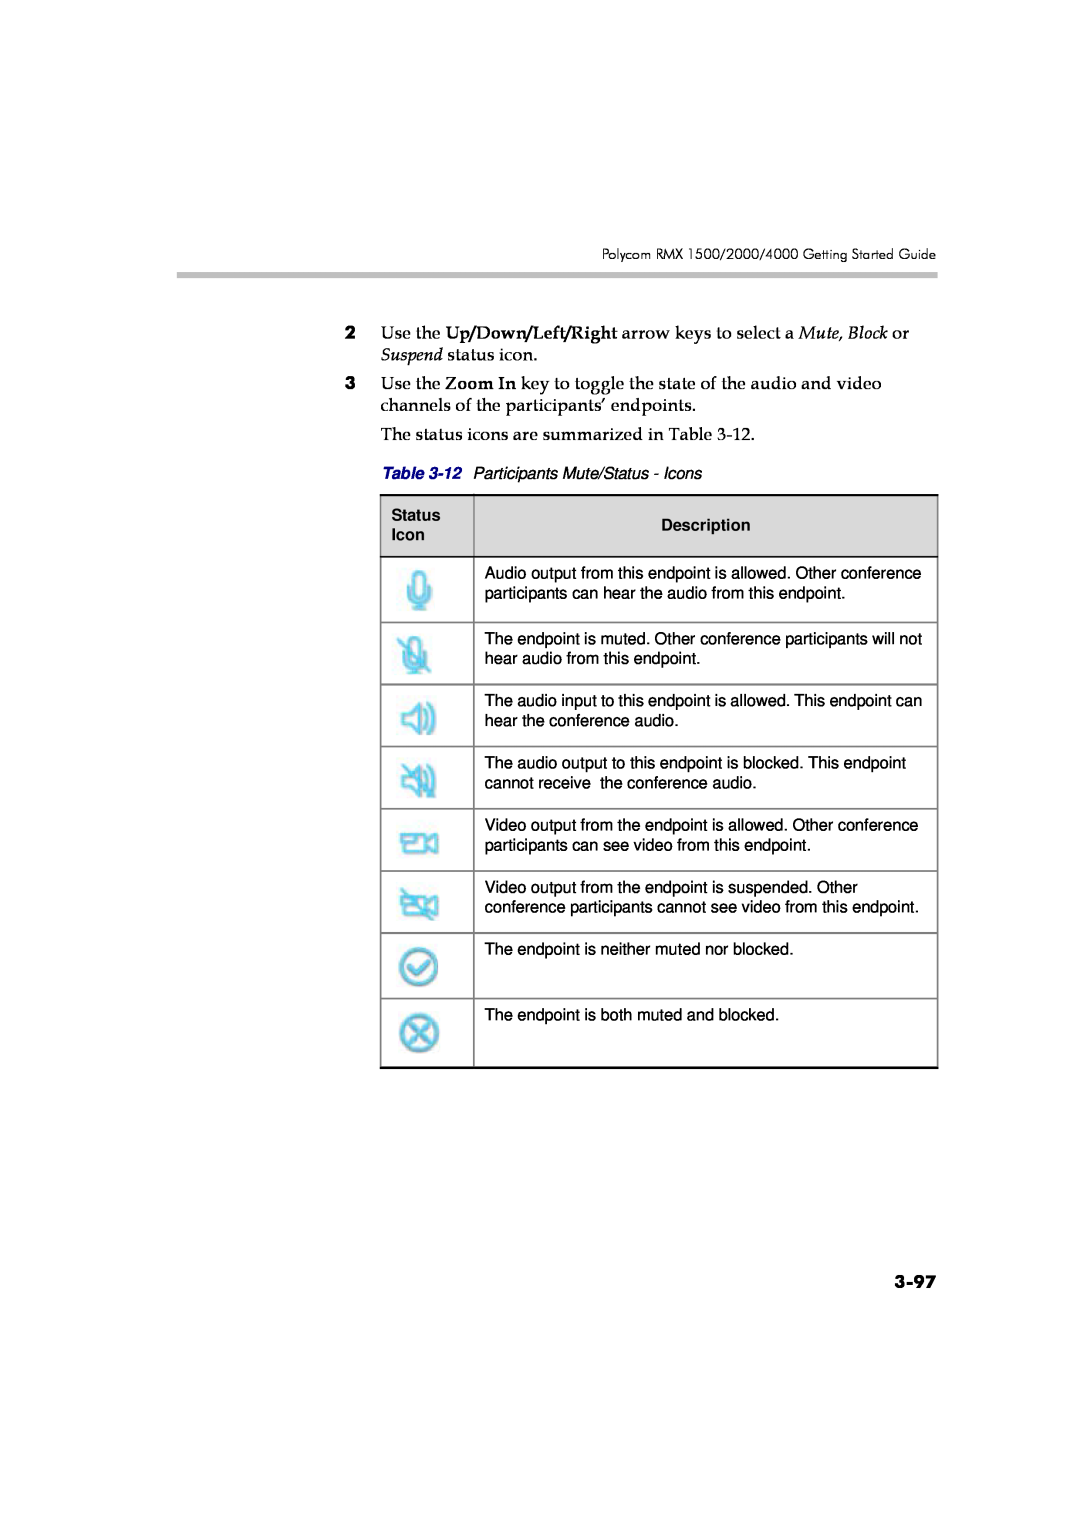 Polycom DOC2560A manual 3-97, The status icons are summarized in Table 